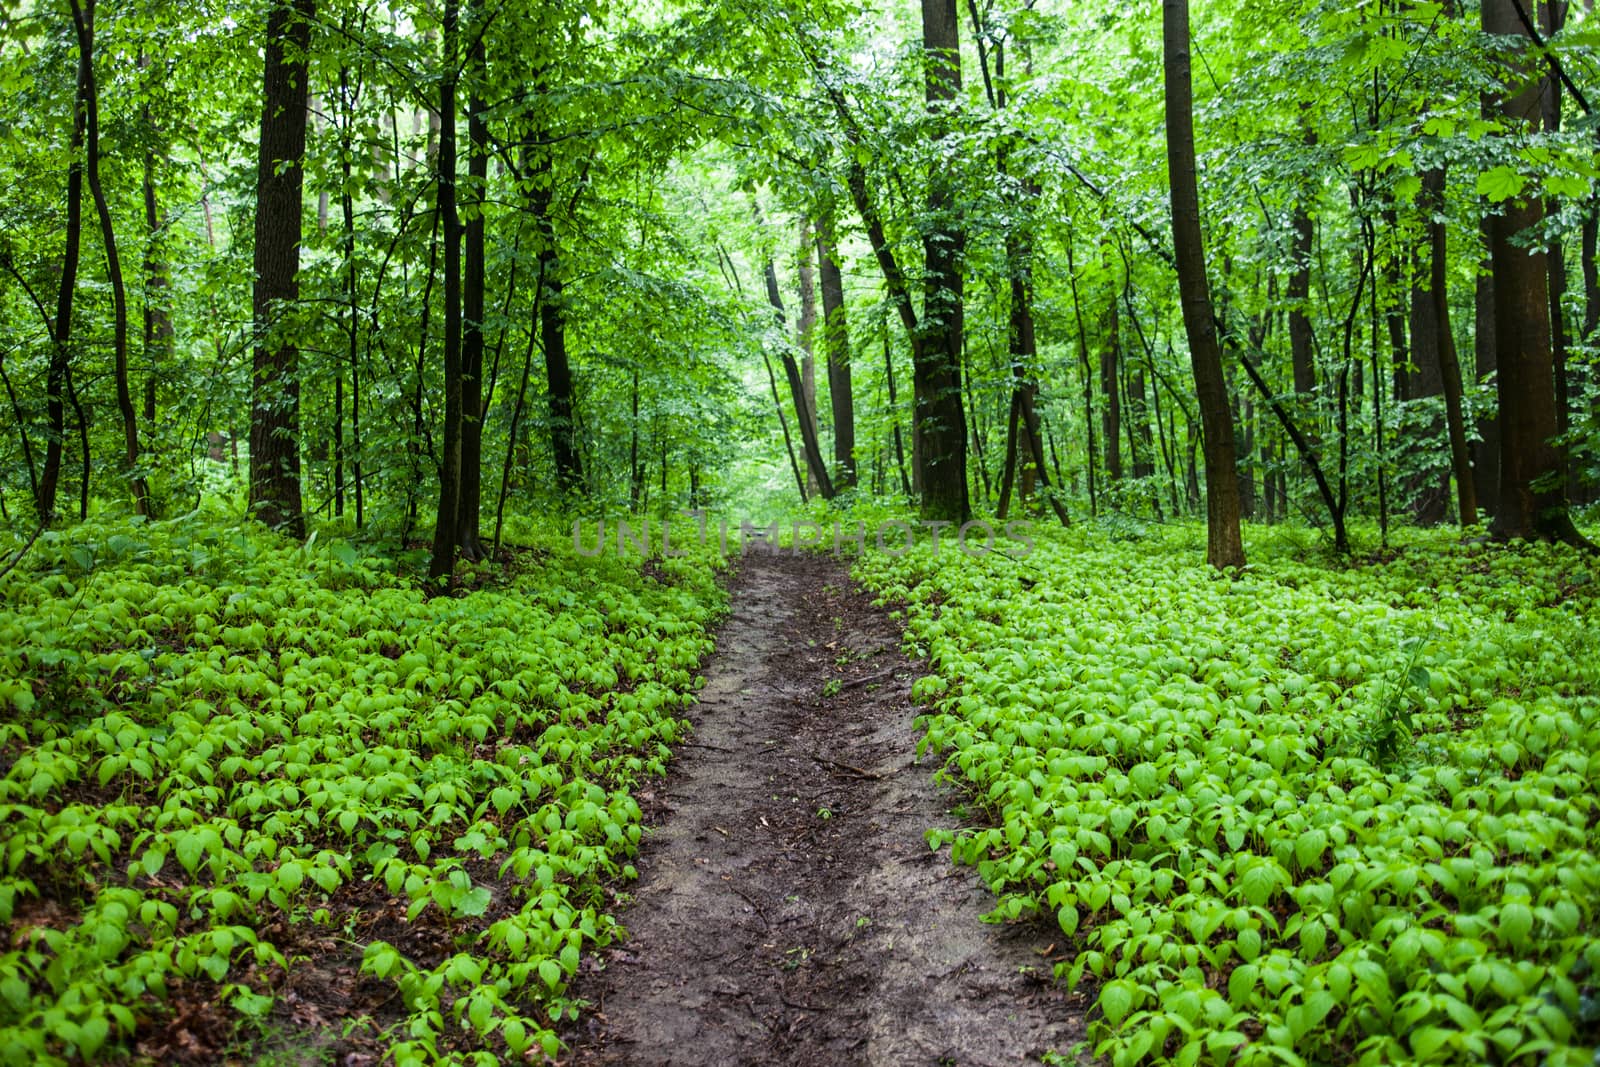 The path in a green summer forest.